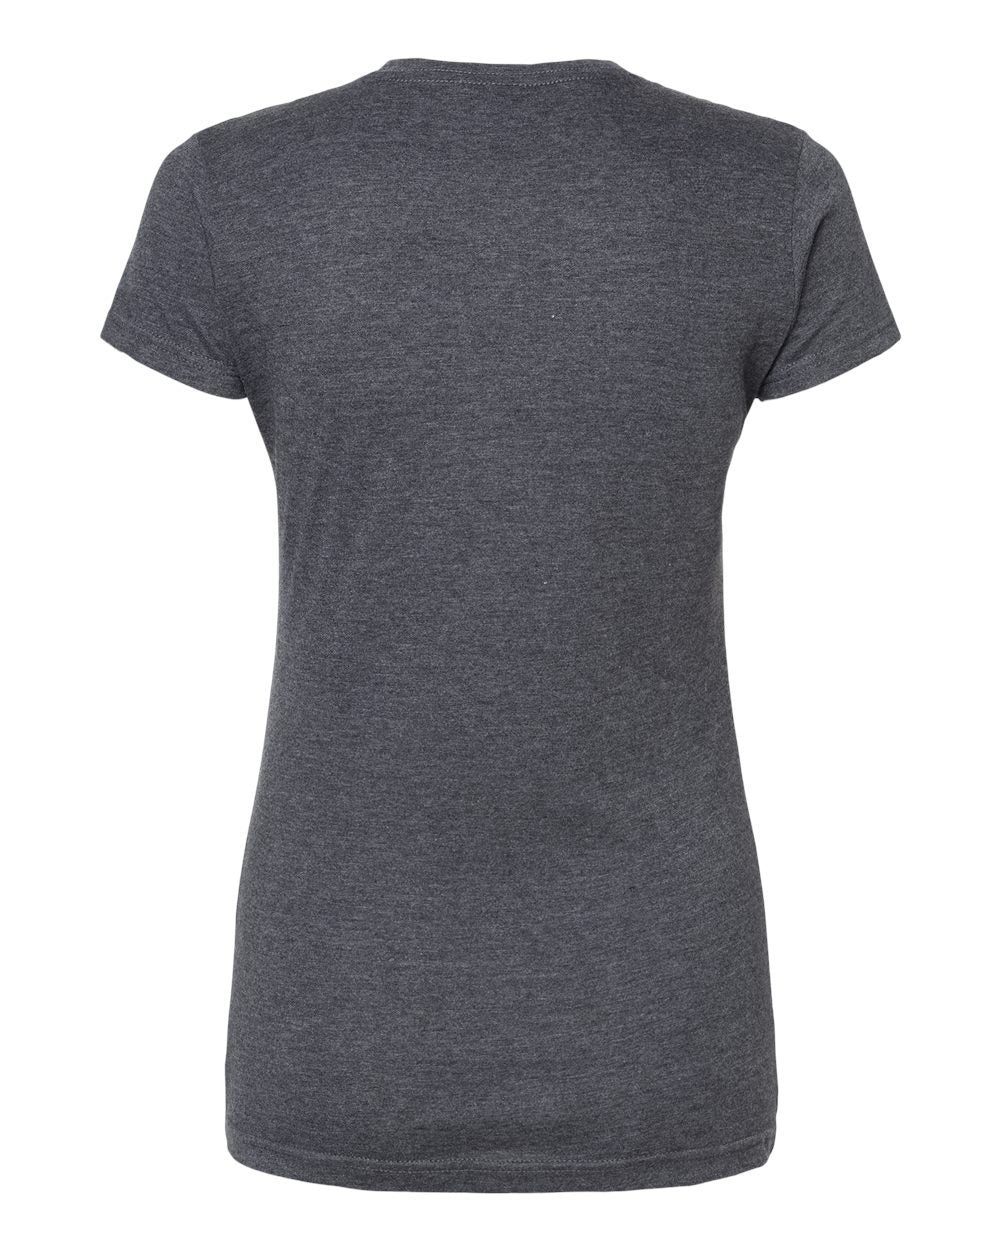 M&O Women's Fine Jersey T-Shirt 4513 #color_Heather Charcoal